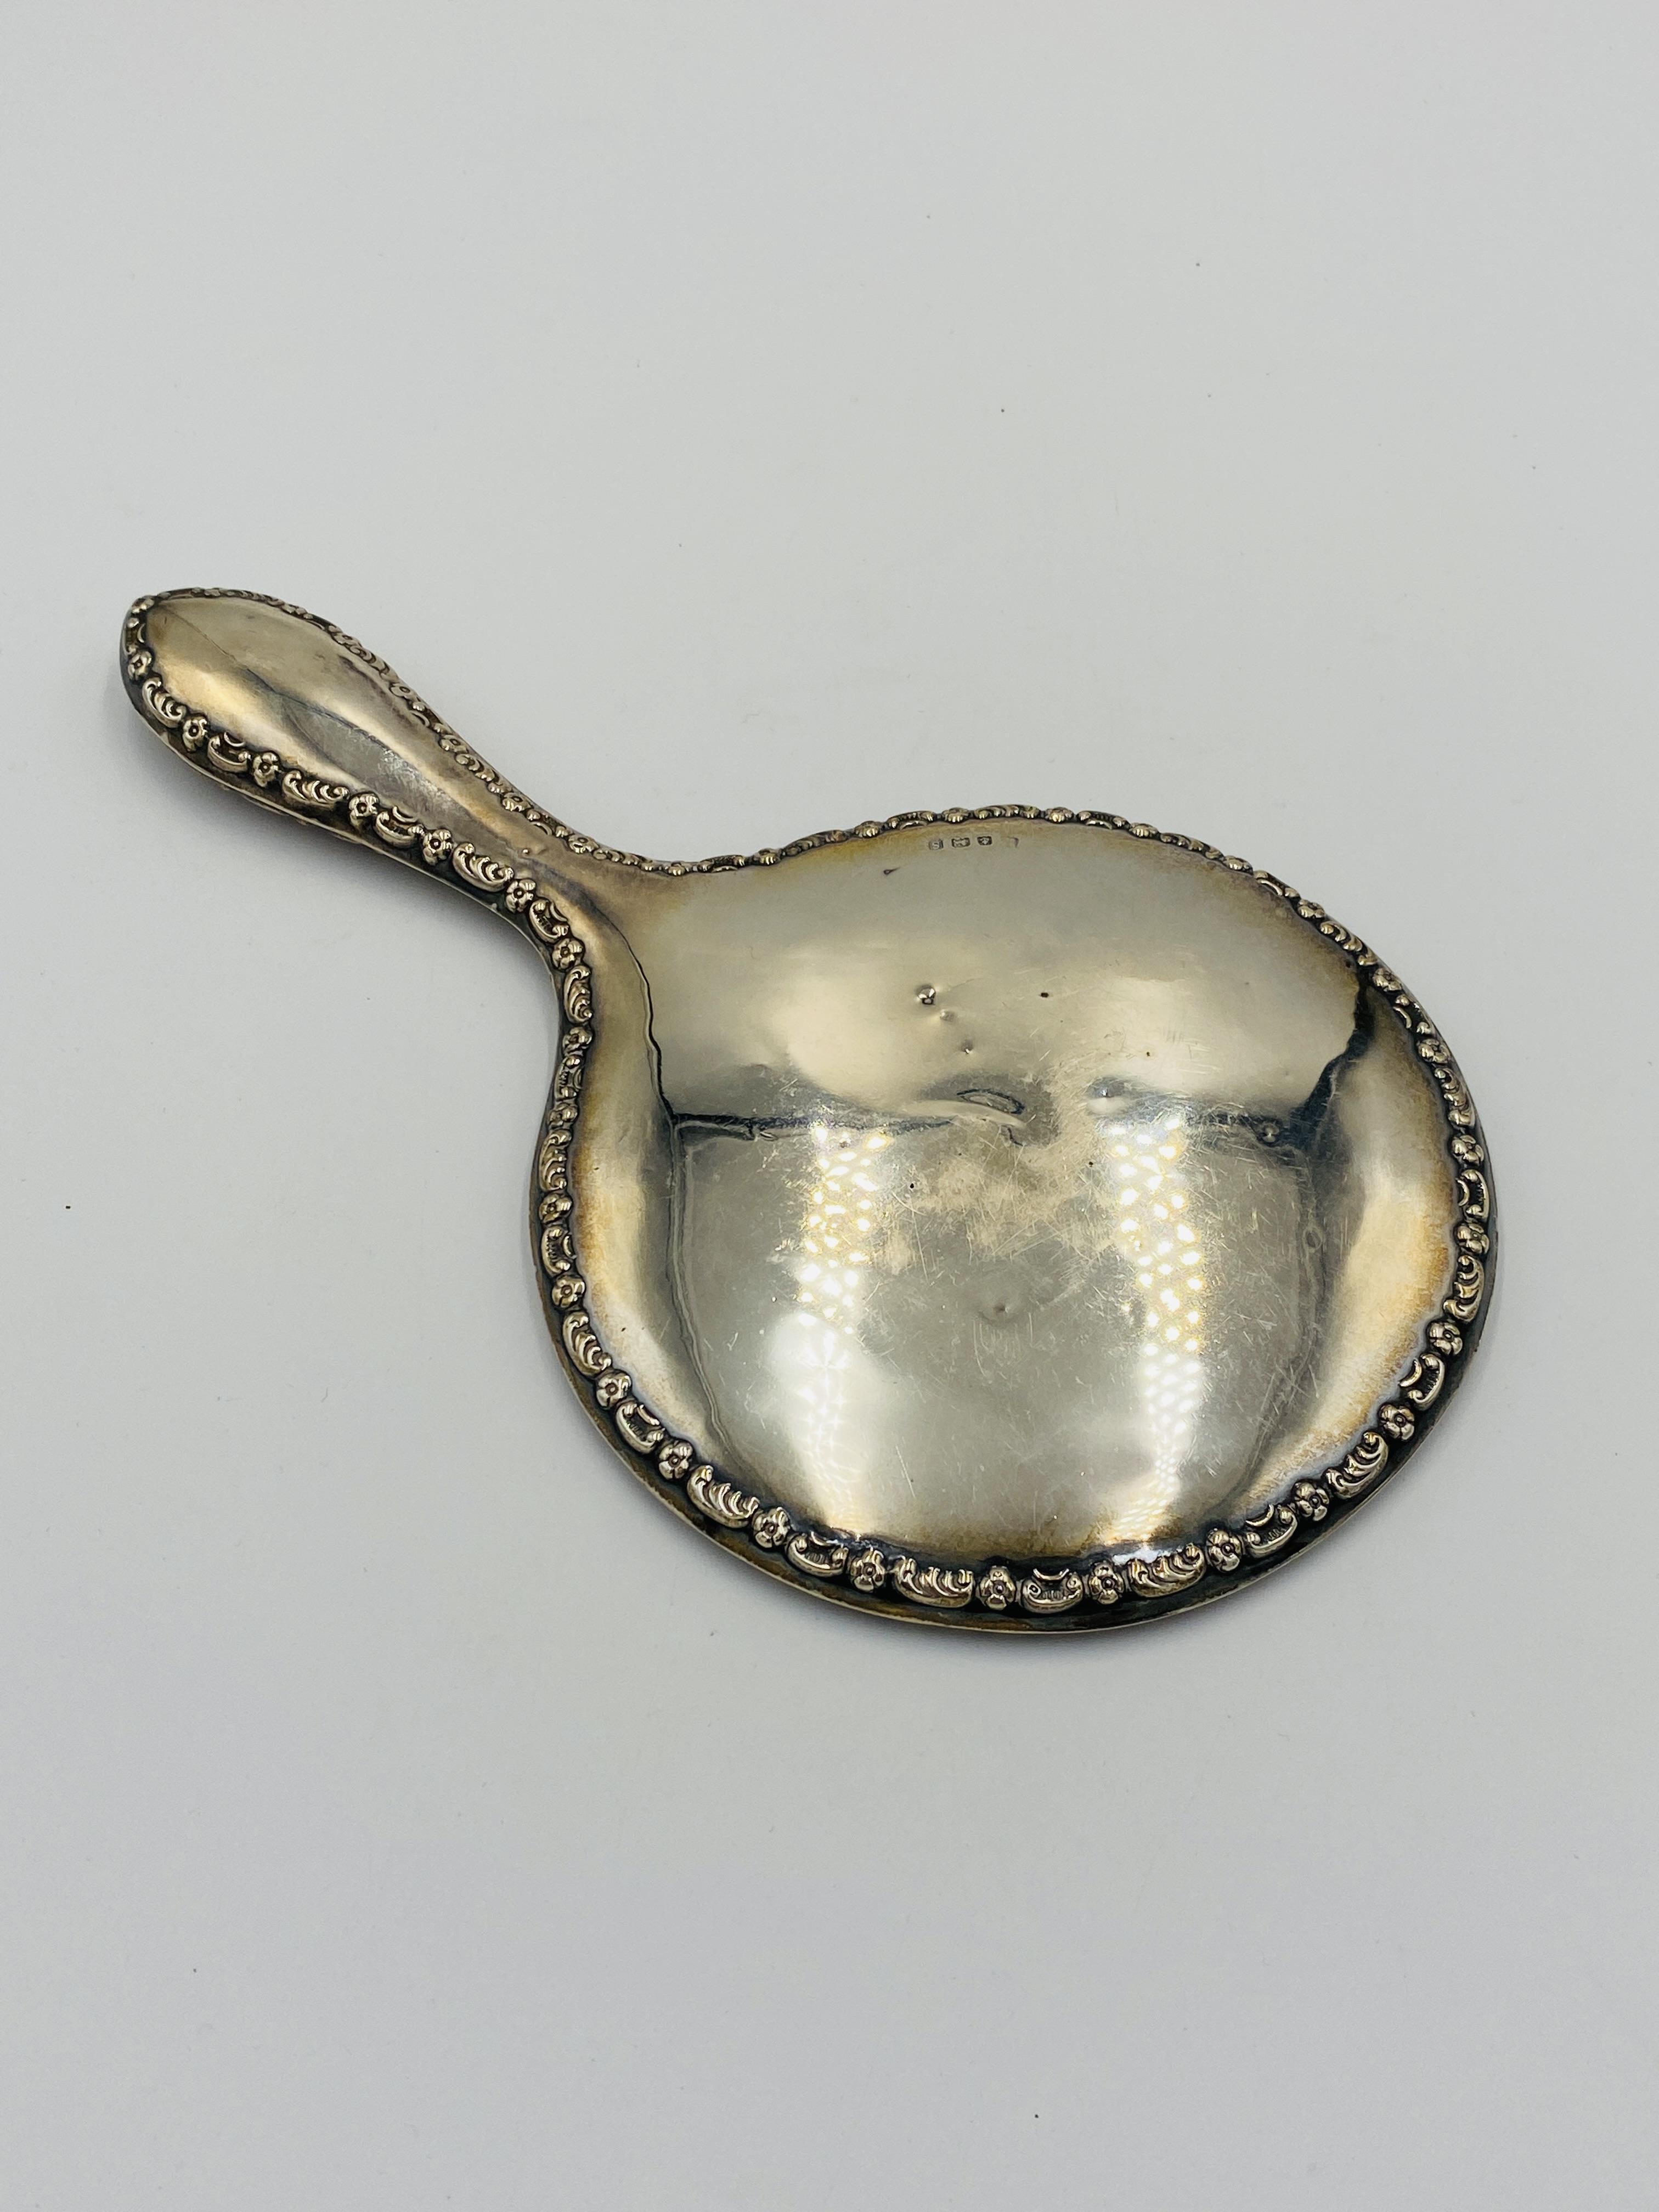 SIlver backed mirror and brushes - Image 6 of 6